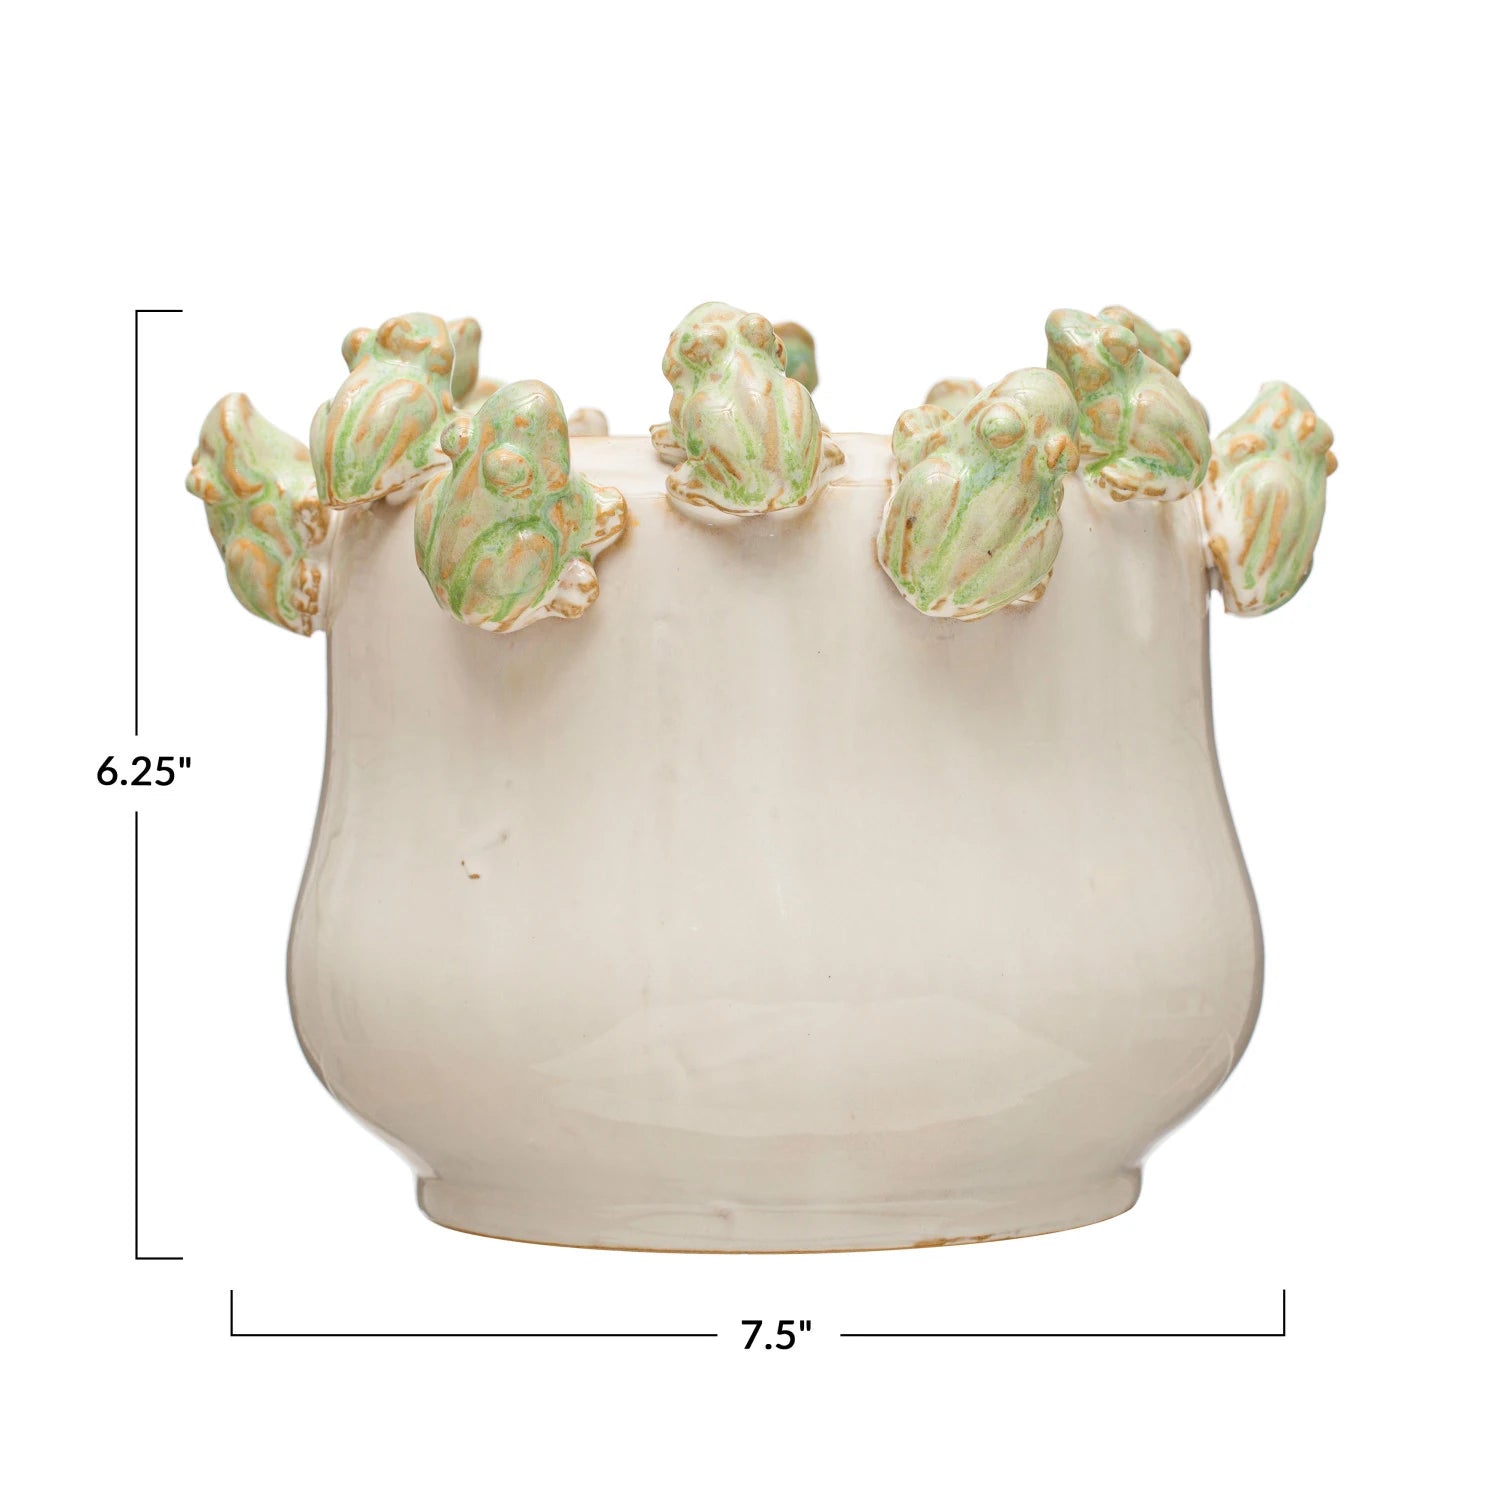 Measurements of the stoneware planter with frogs on rim.